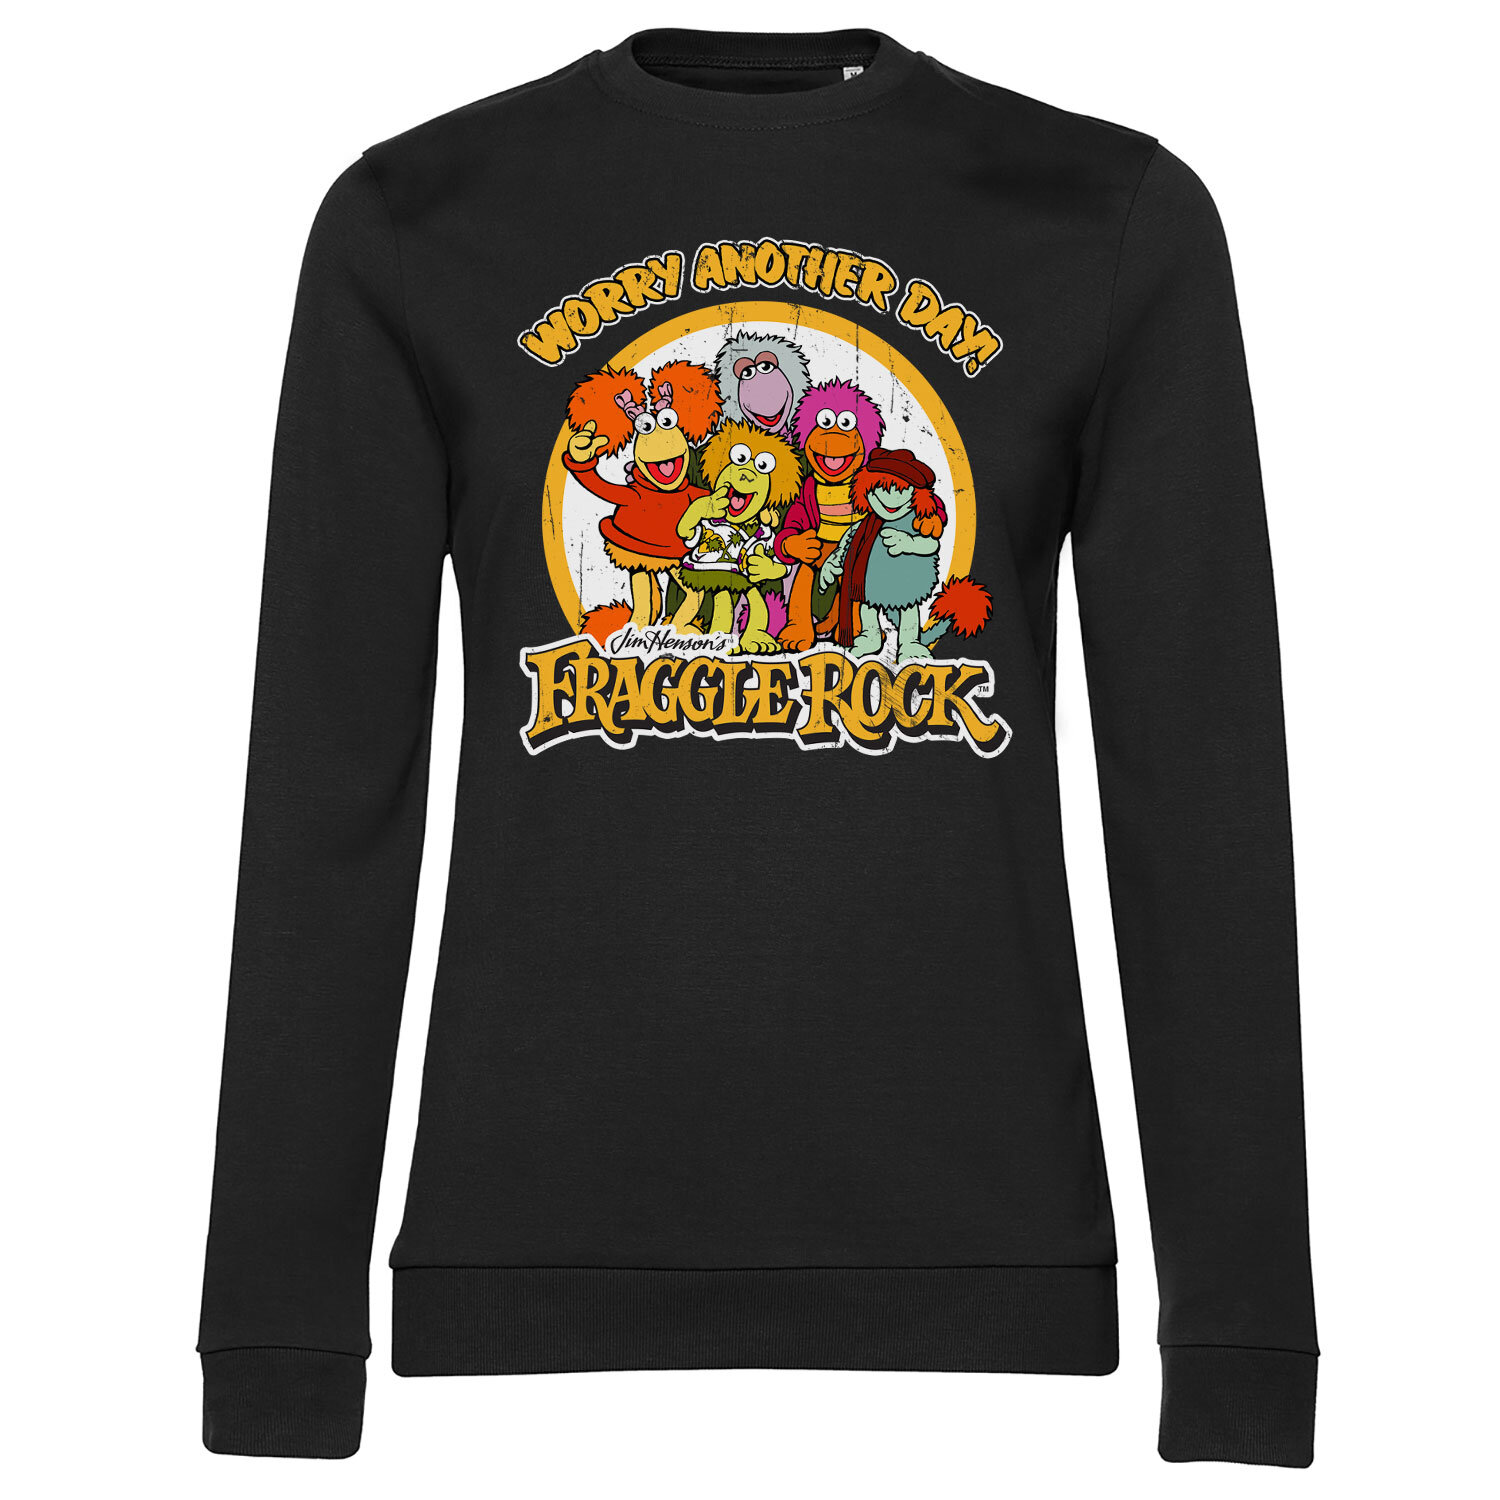 Fraggle Rock - Worry Another Day Girly Sweatshirt